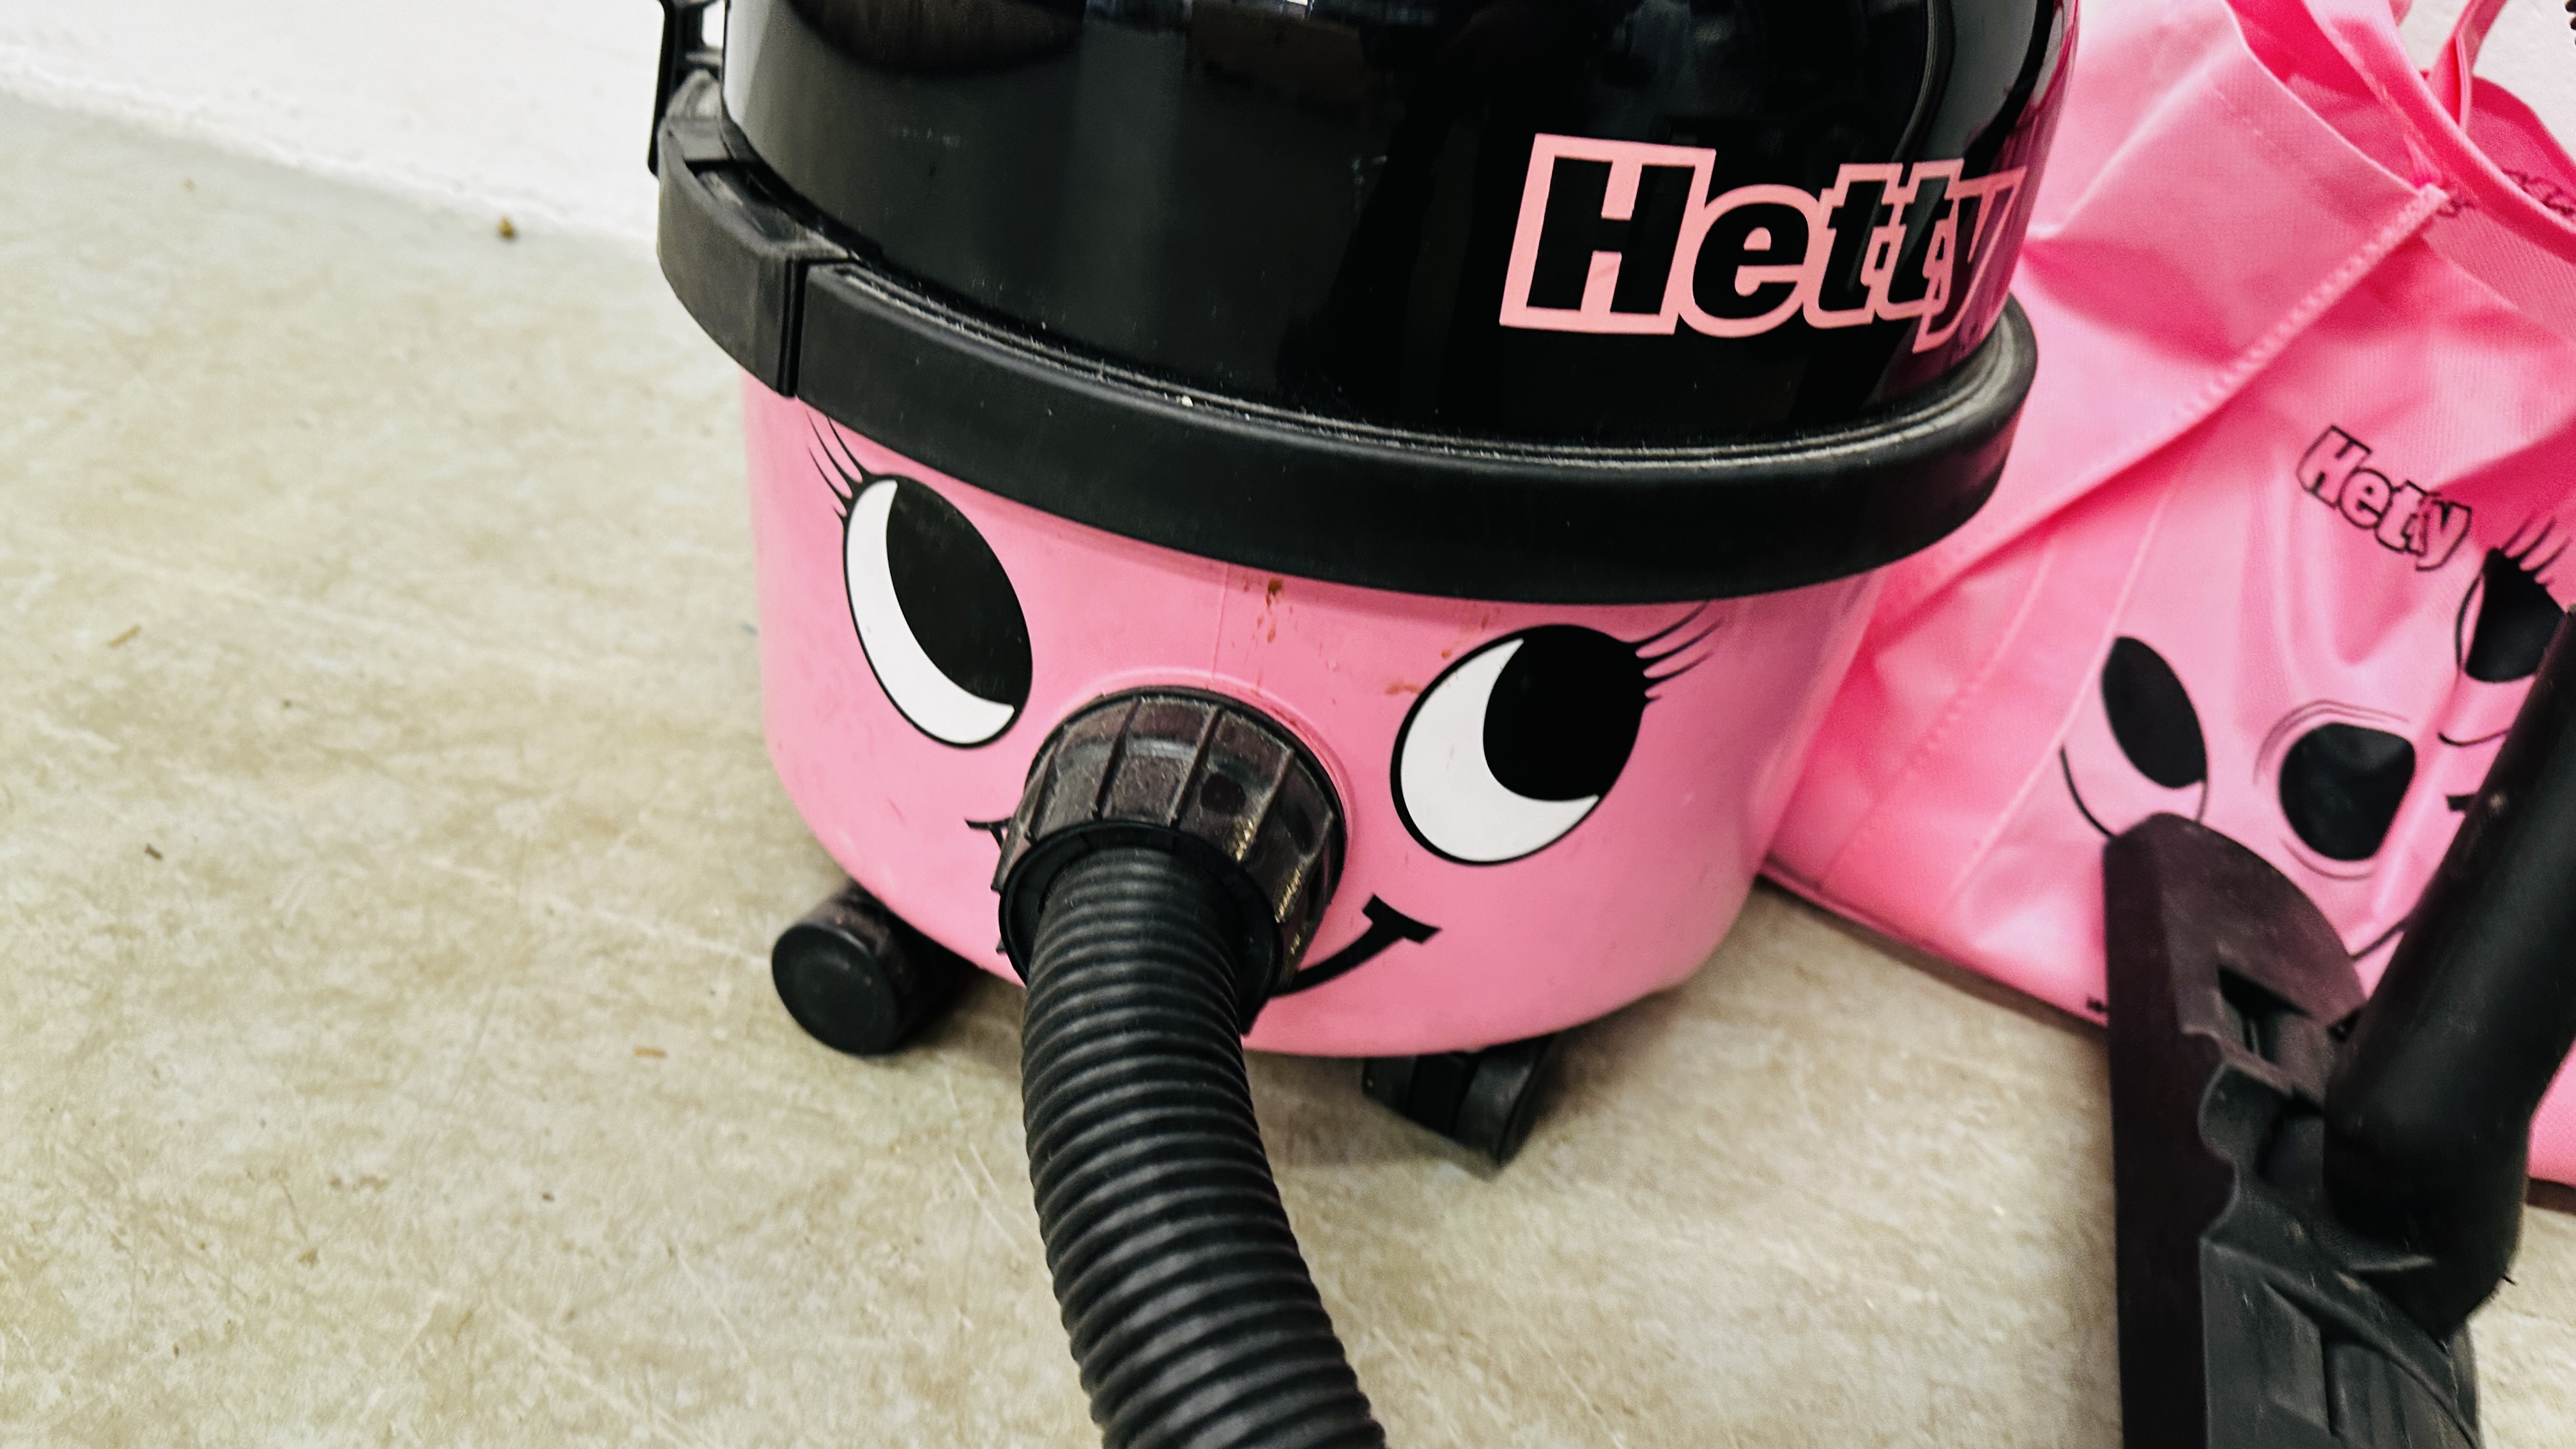 A 'HETTY' NUMATIC VACUUM CLEANER WITH SPARE BAGS AND ACCESSORIES - SOLD AS SEEN. - Image 3 of 7